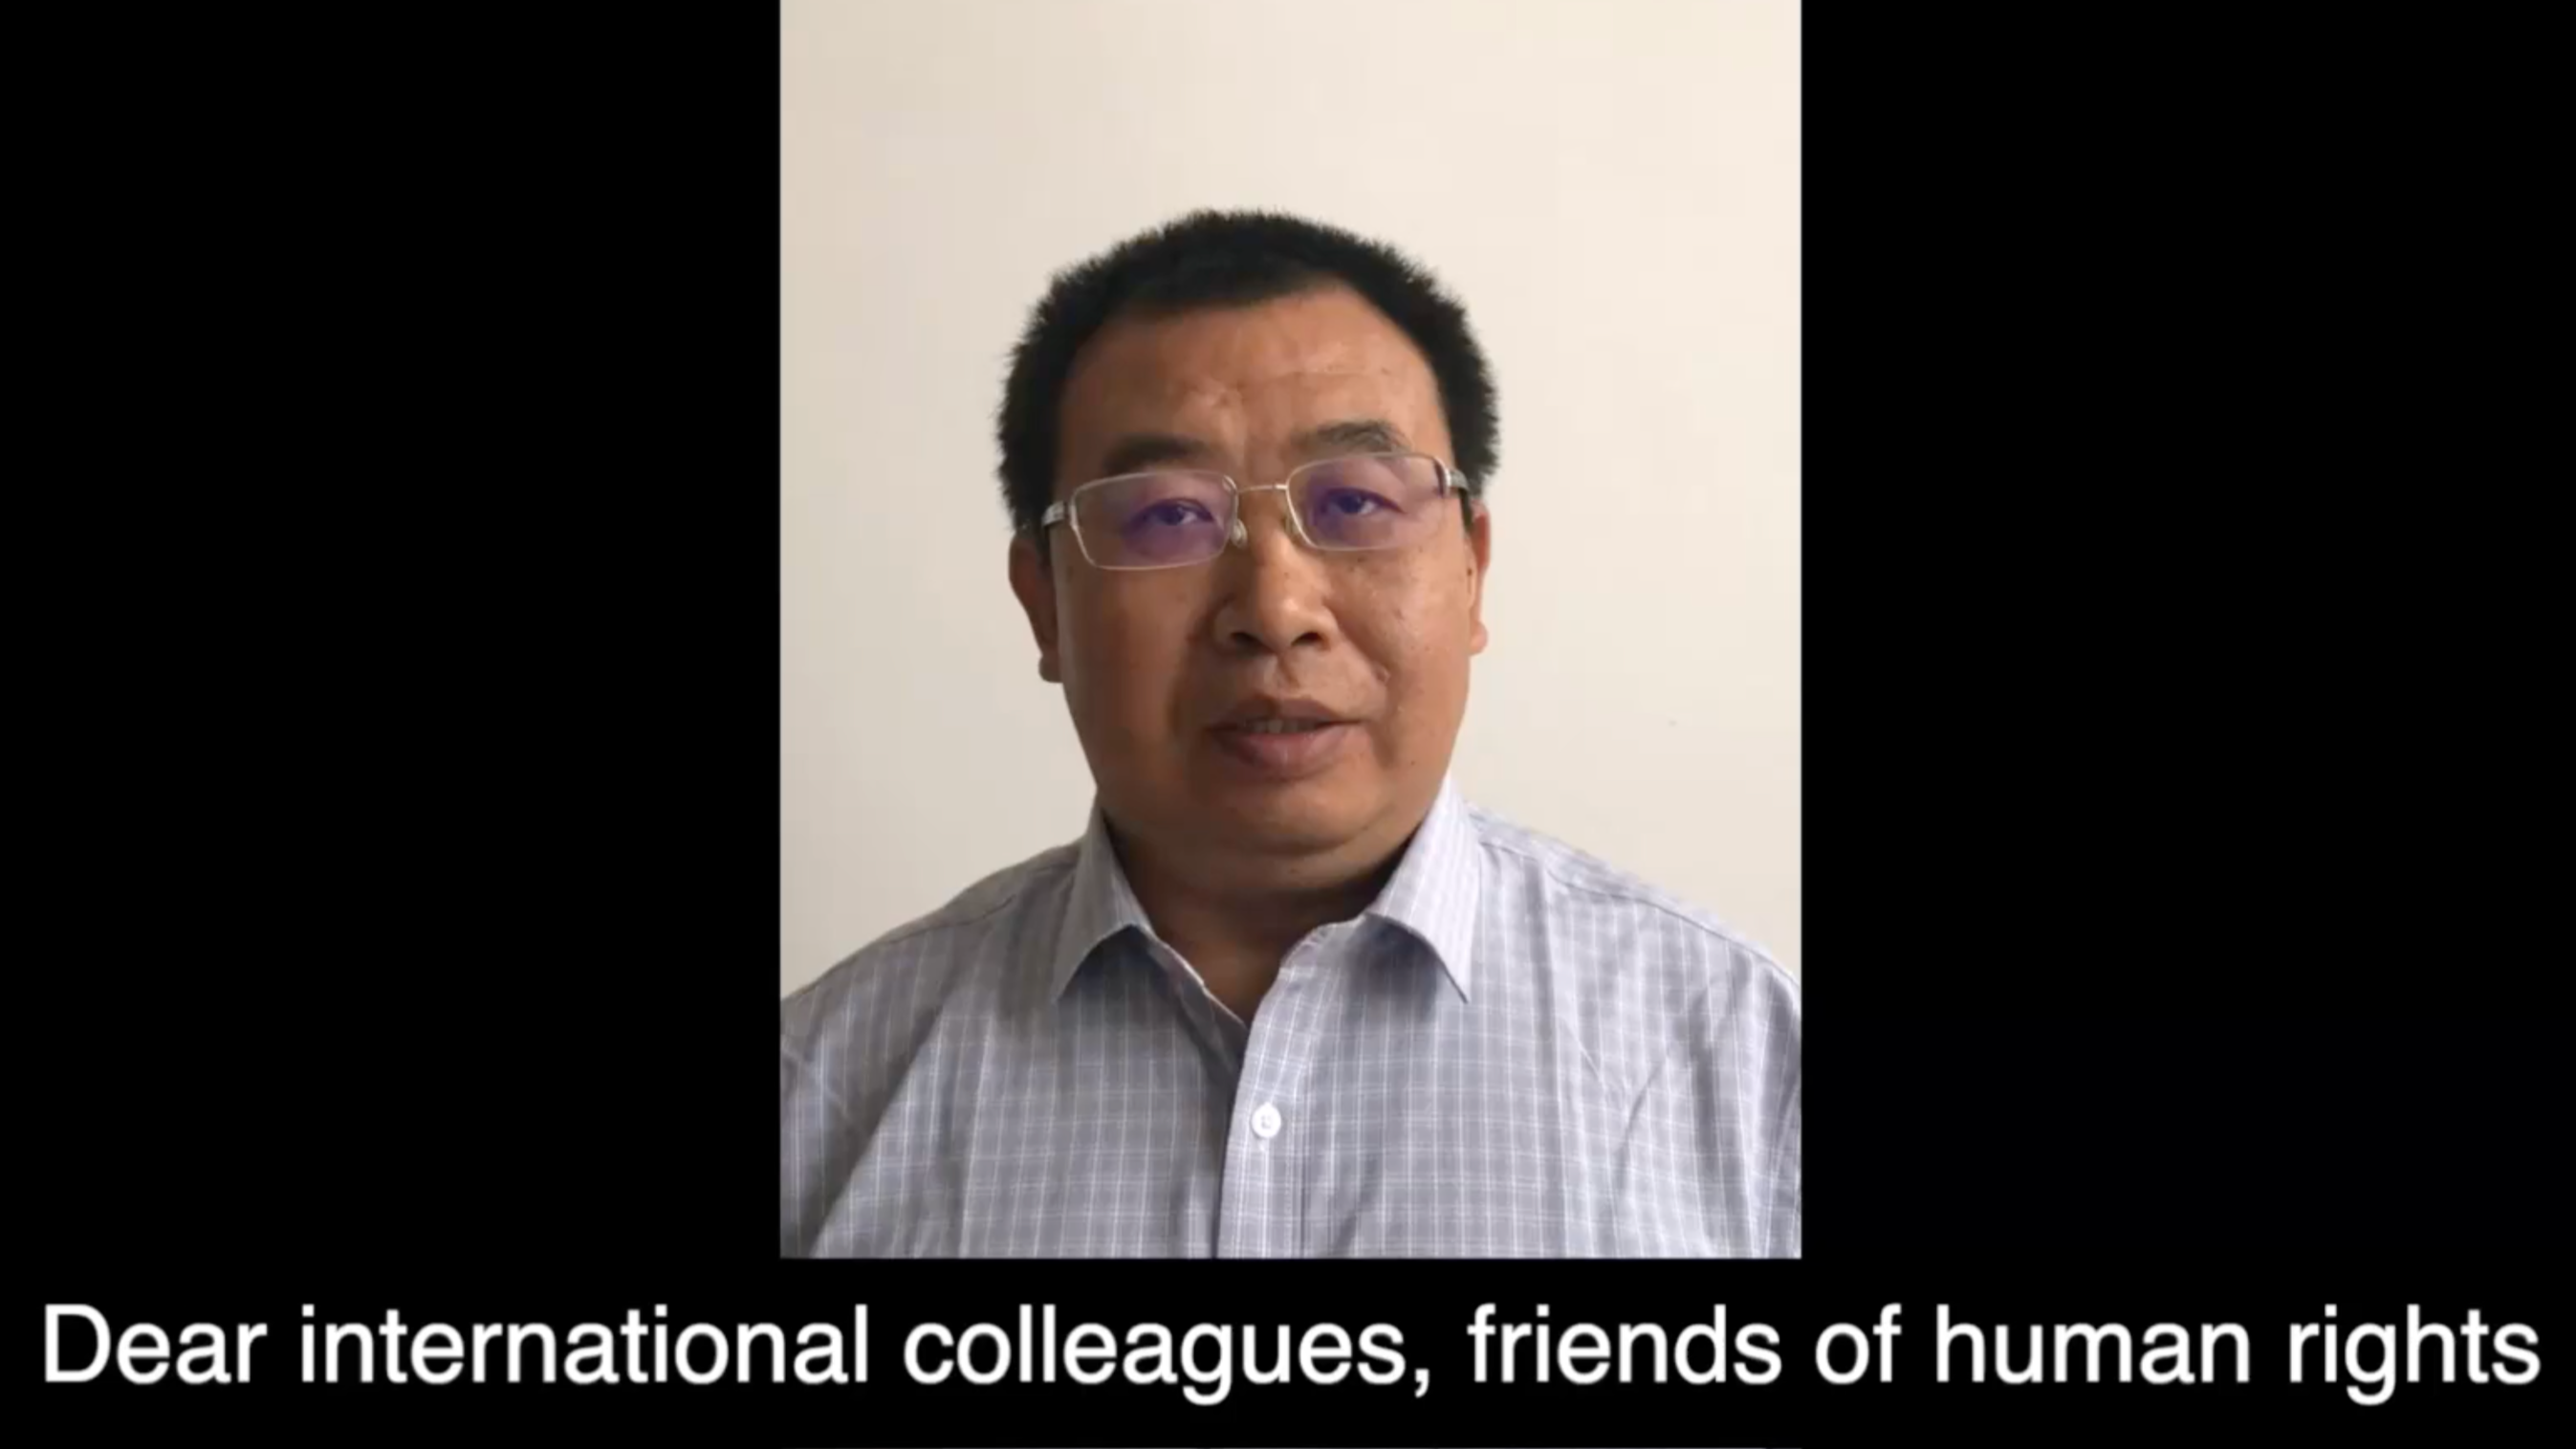 Jiang Tianyong in his home in China, saying "Dear international colleagues, friends of human rights" in his speech to accept his IBA award.